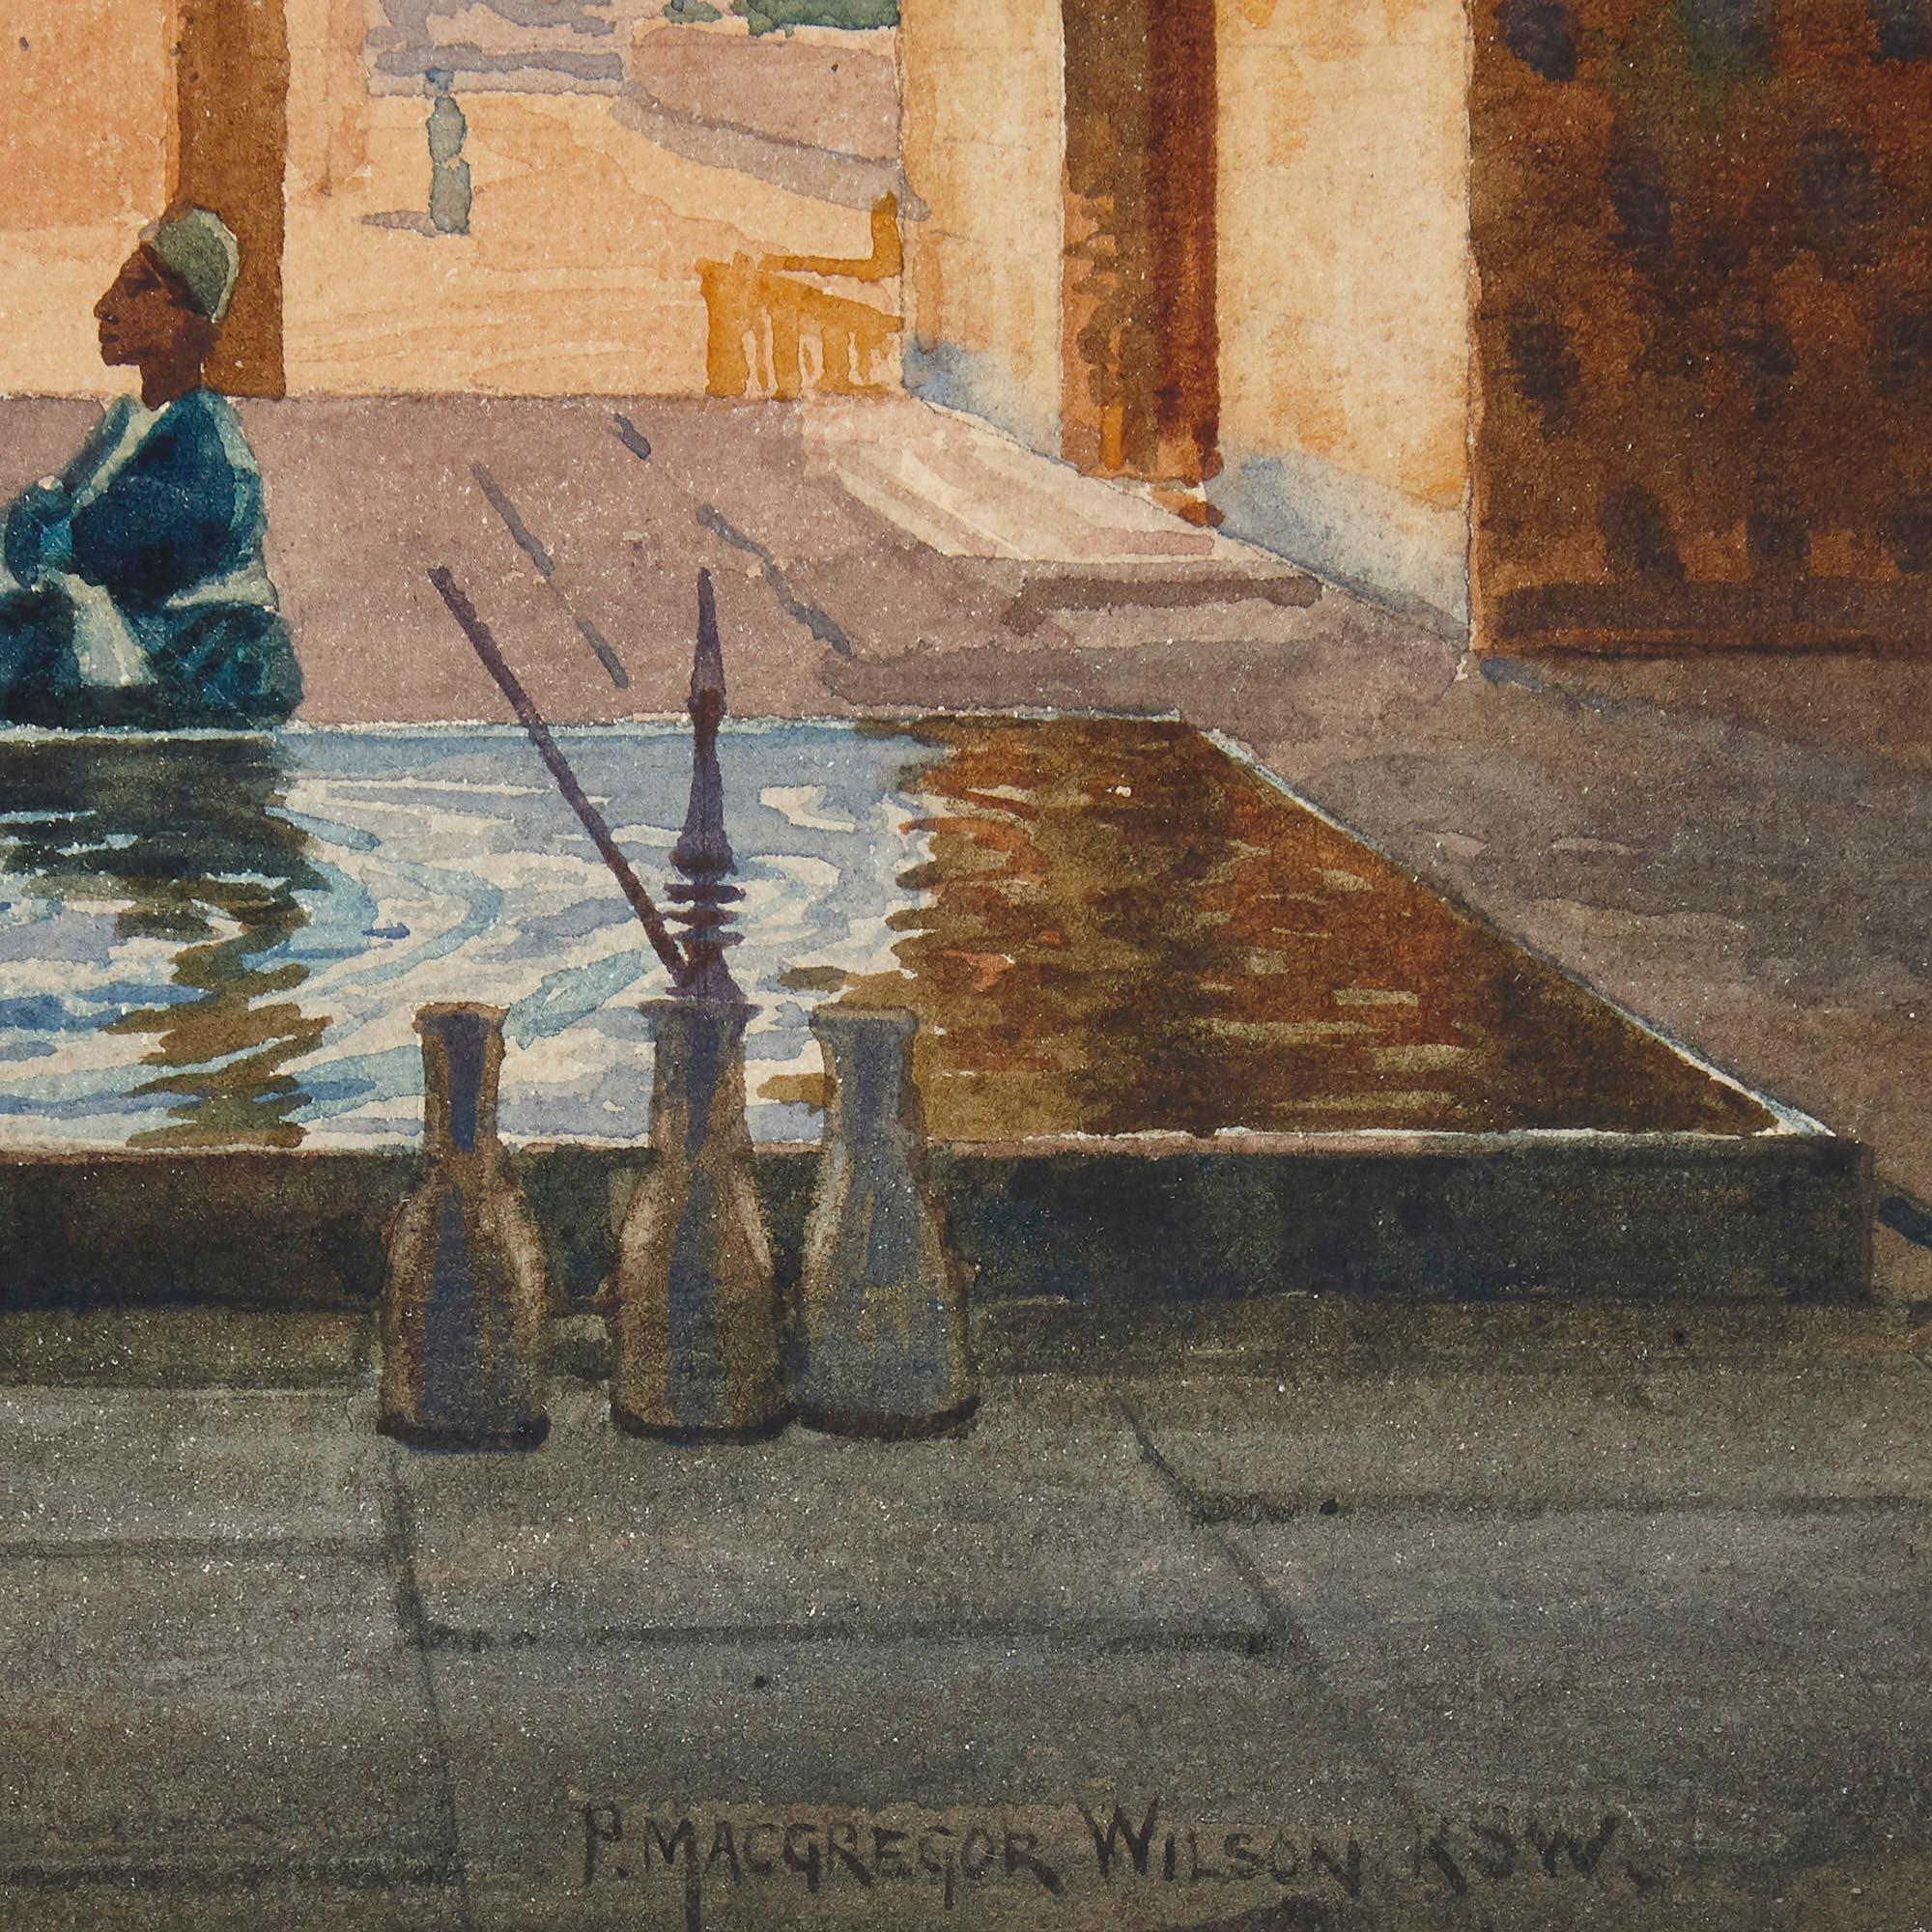 British Orientalist watercolour by Peter MacGregor Wilson
British, early 20th Century
Frame: Height 40cm, width 45cm, depth 2cm
Sheet: Height 22cm, width 28cm

This quite beautiful watercolour is by the Scottish artist Peter MacGregor Wilson, who